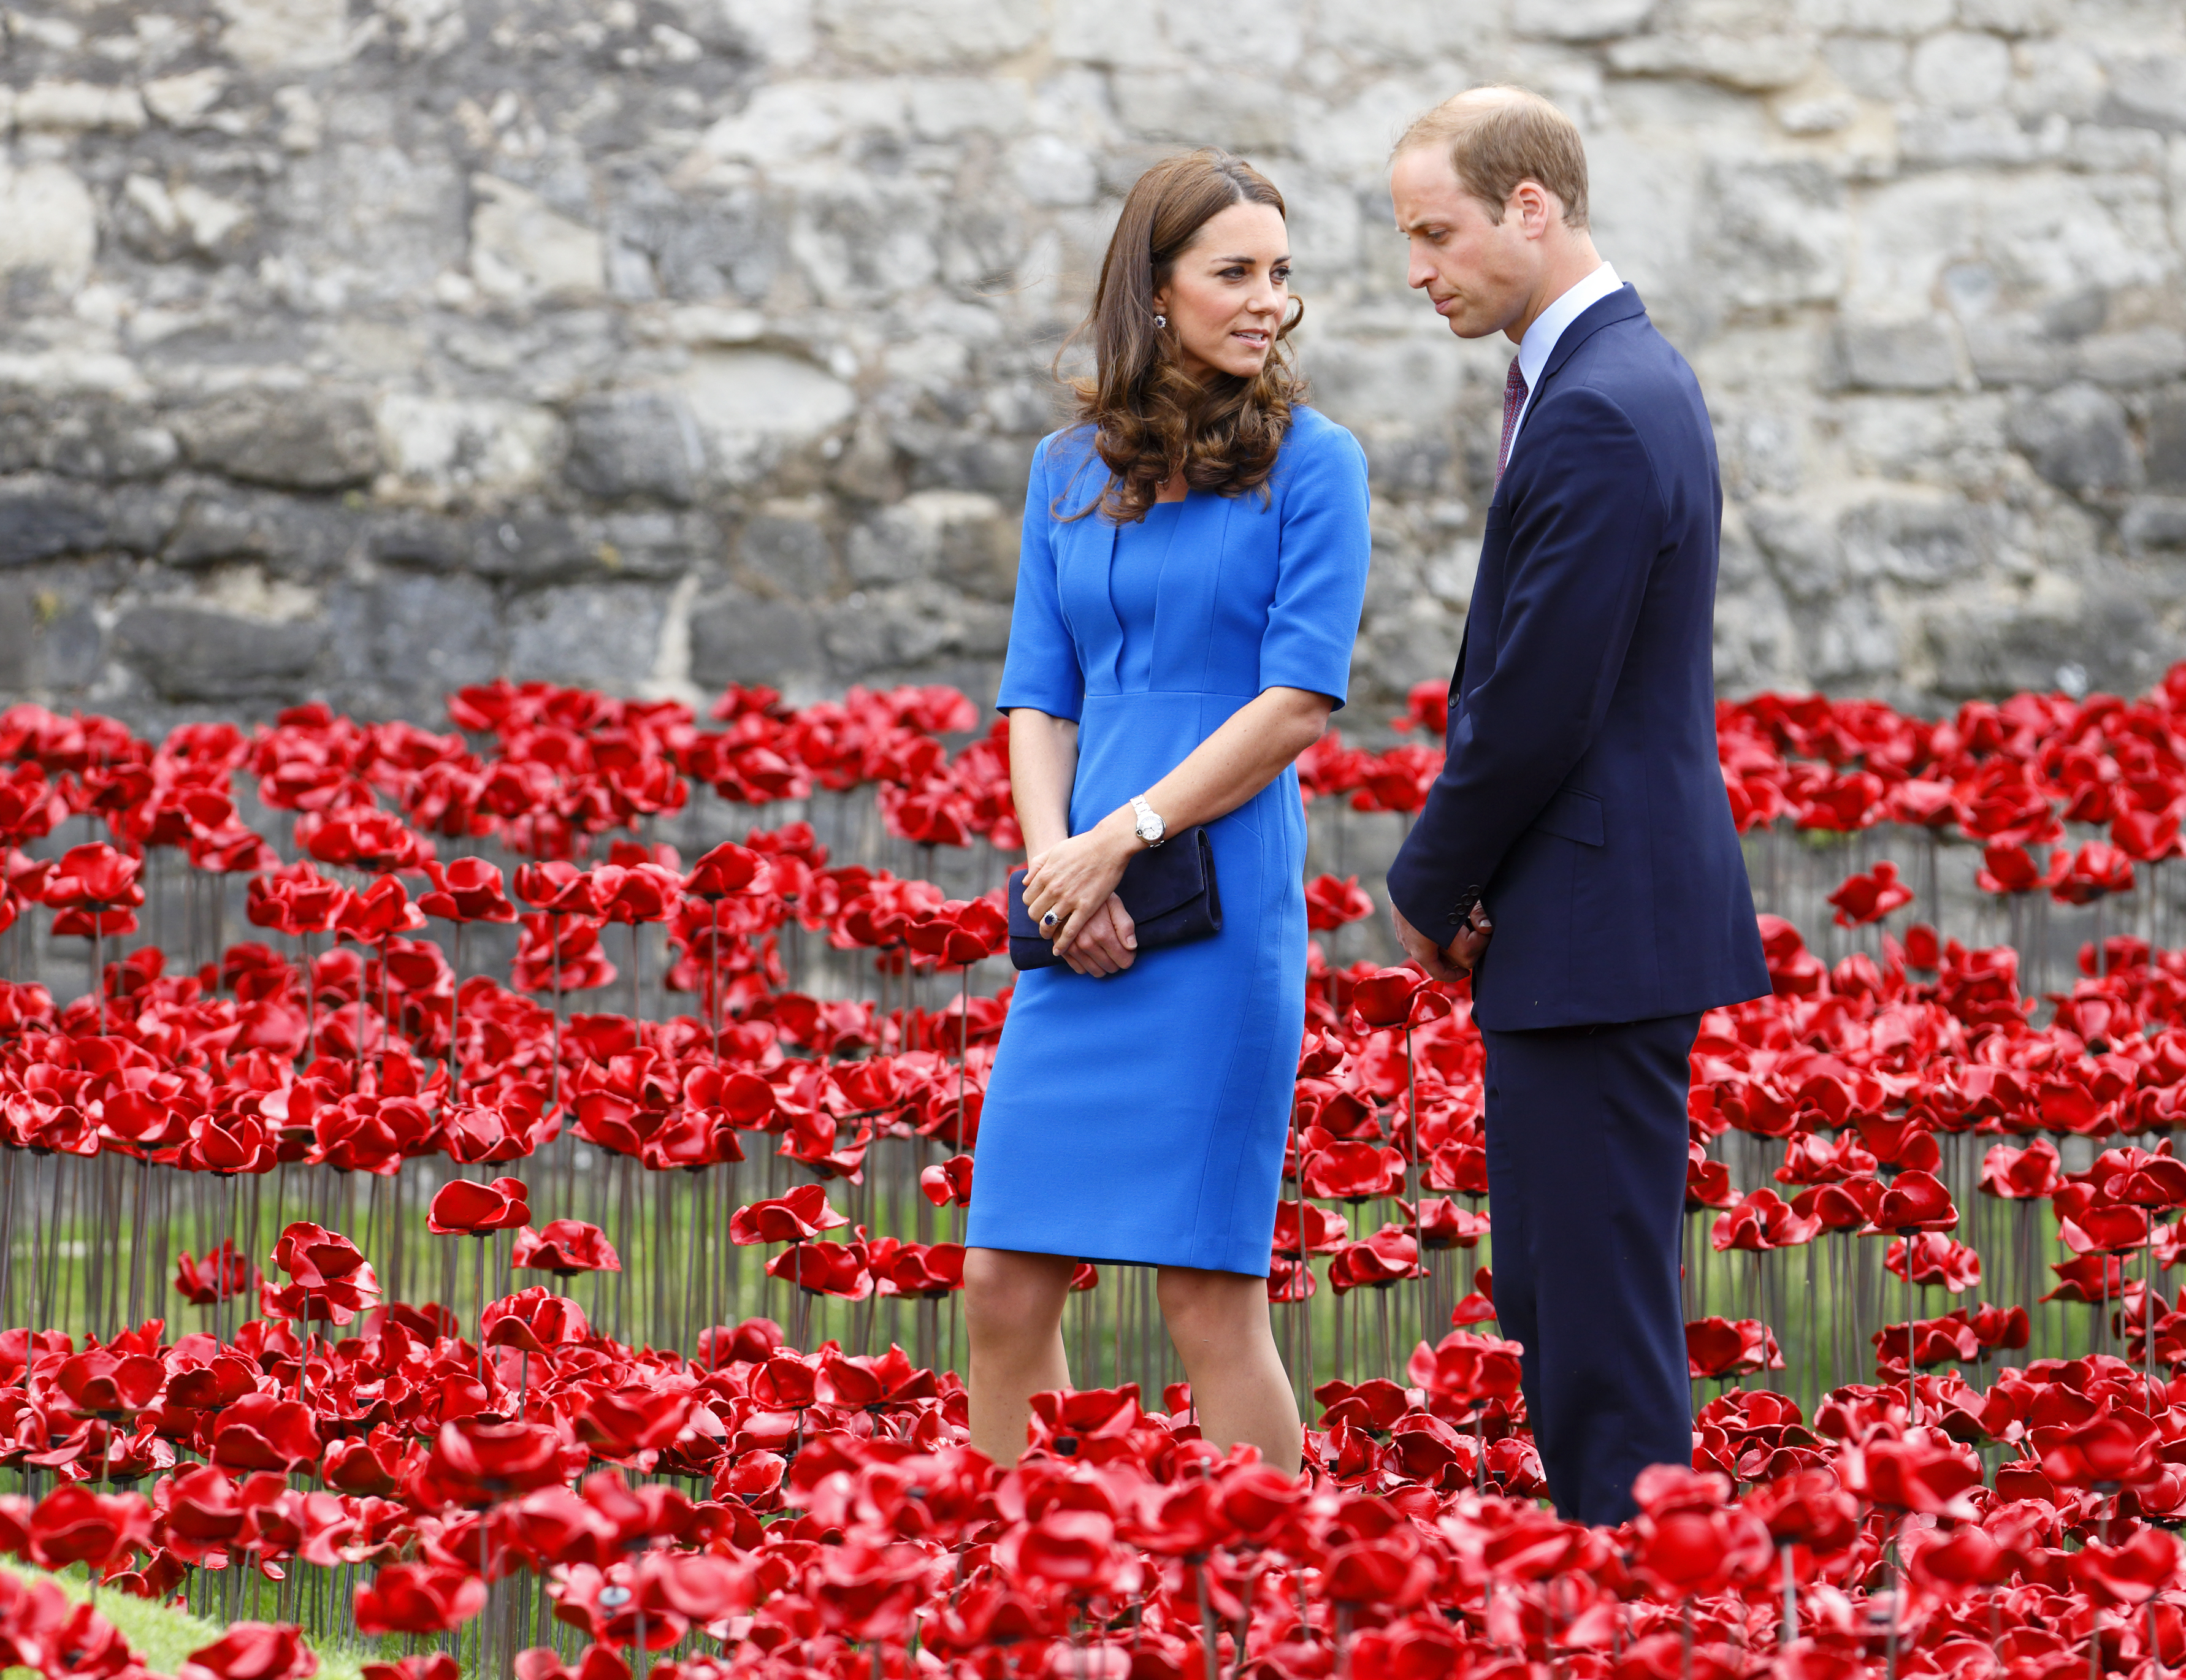 Catherine, Duchess of Cambridge and Prince William, Duke of Cambridge walk through a poppy field art installation entitled 'Blood Swept Lands and Seas of Red' by artist Paul Cummins, in the moat of the Tower of London, to commemorate the First World War on August 5, 2014 in London, England. (Max Mumby&mdash;Indigo/Getty Images)